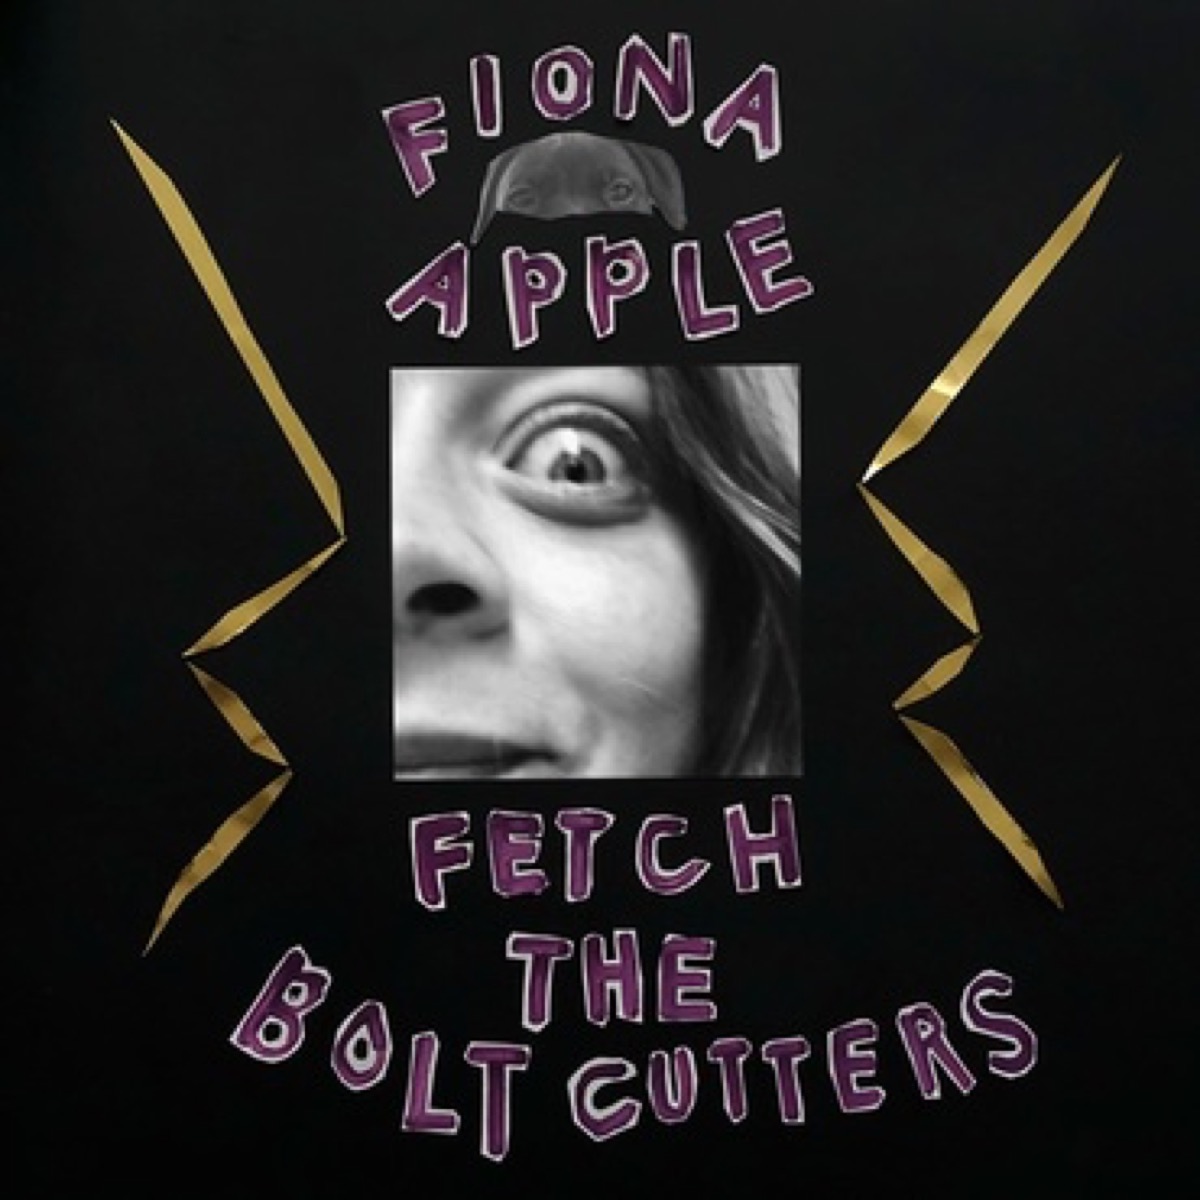 Fiona Apple - Fetch the Bold Cutters